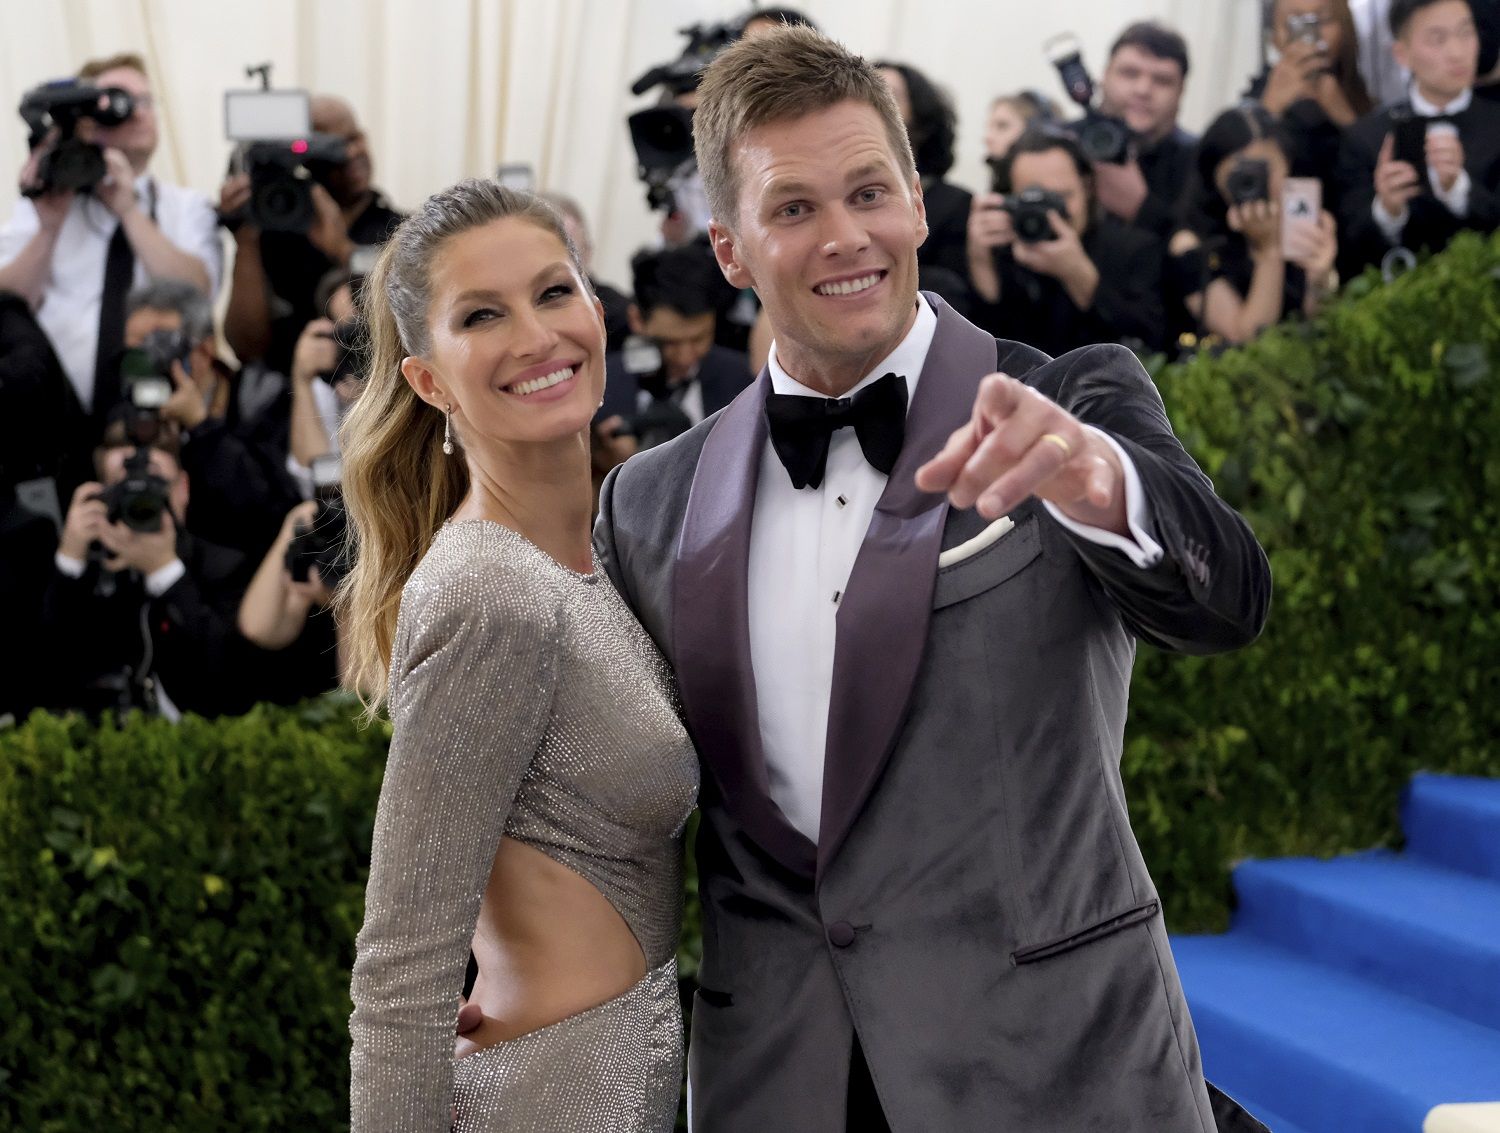 Gisele Bundchen, left, and Tom Brady attend The Metropolitan Museum of Art's Costume Institute benefit gala celebrating the opening of the Rei Kawakubo/Comme des Garçons: Art of the In-Between exhibition on Monday, May 1, 2017, in New York. (Photo by Charles Sykes/Invision/AP)